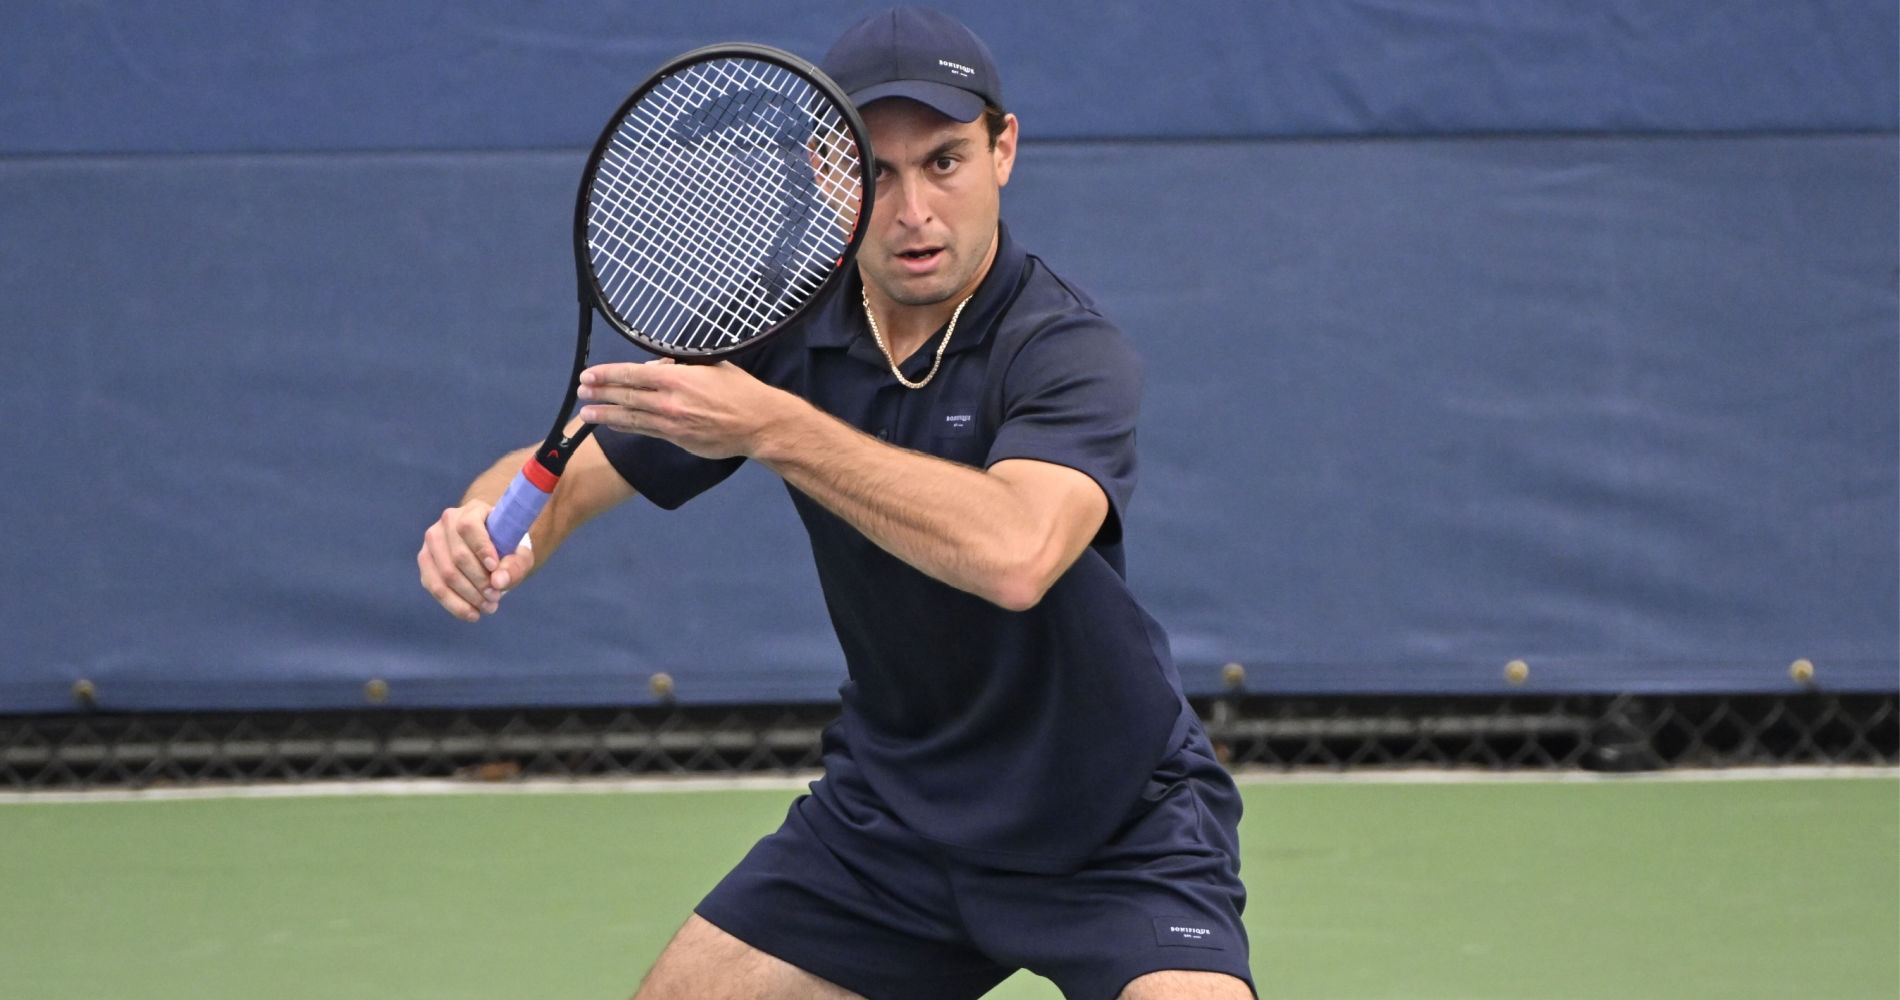 US Open Karatsev crushes 83 winners en route to third round